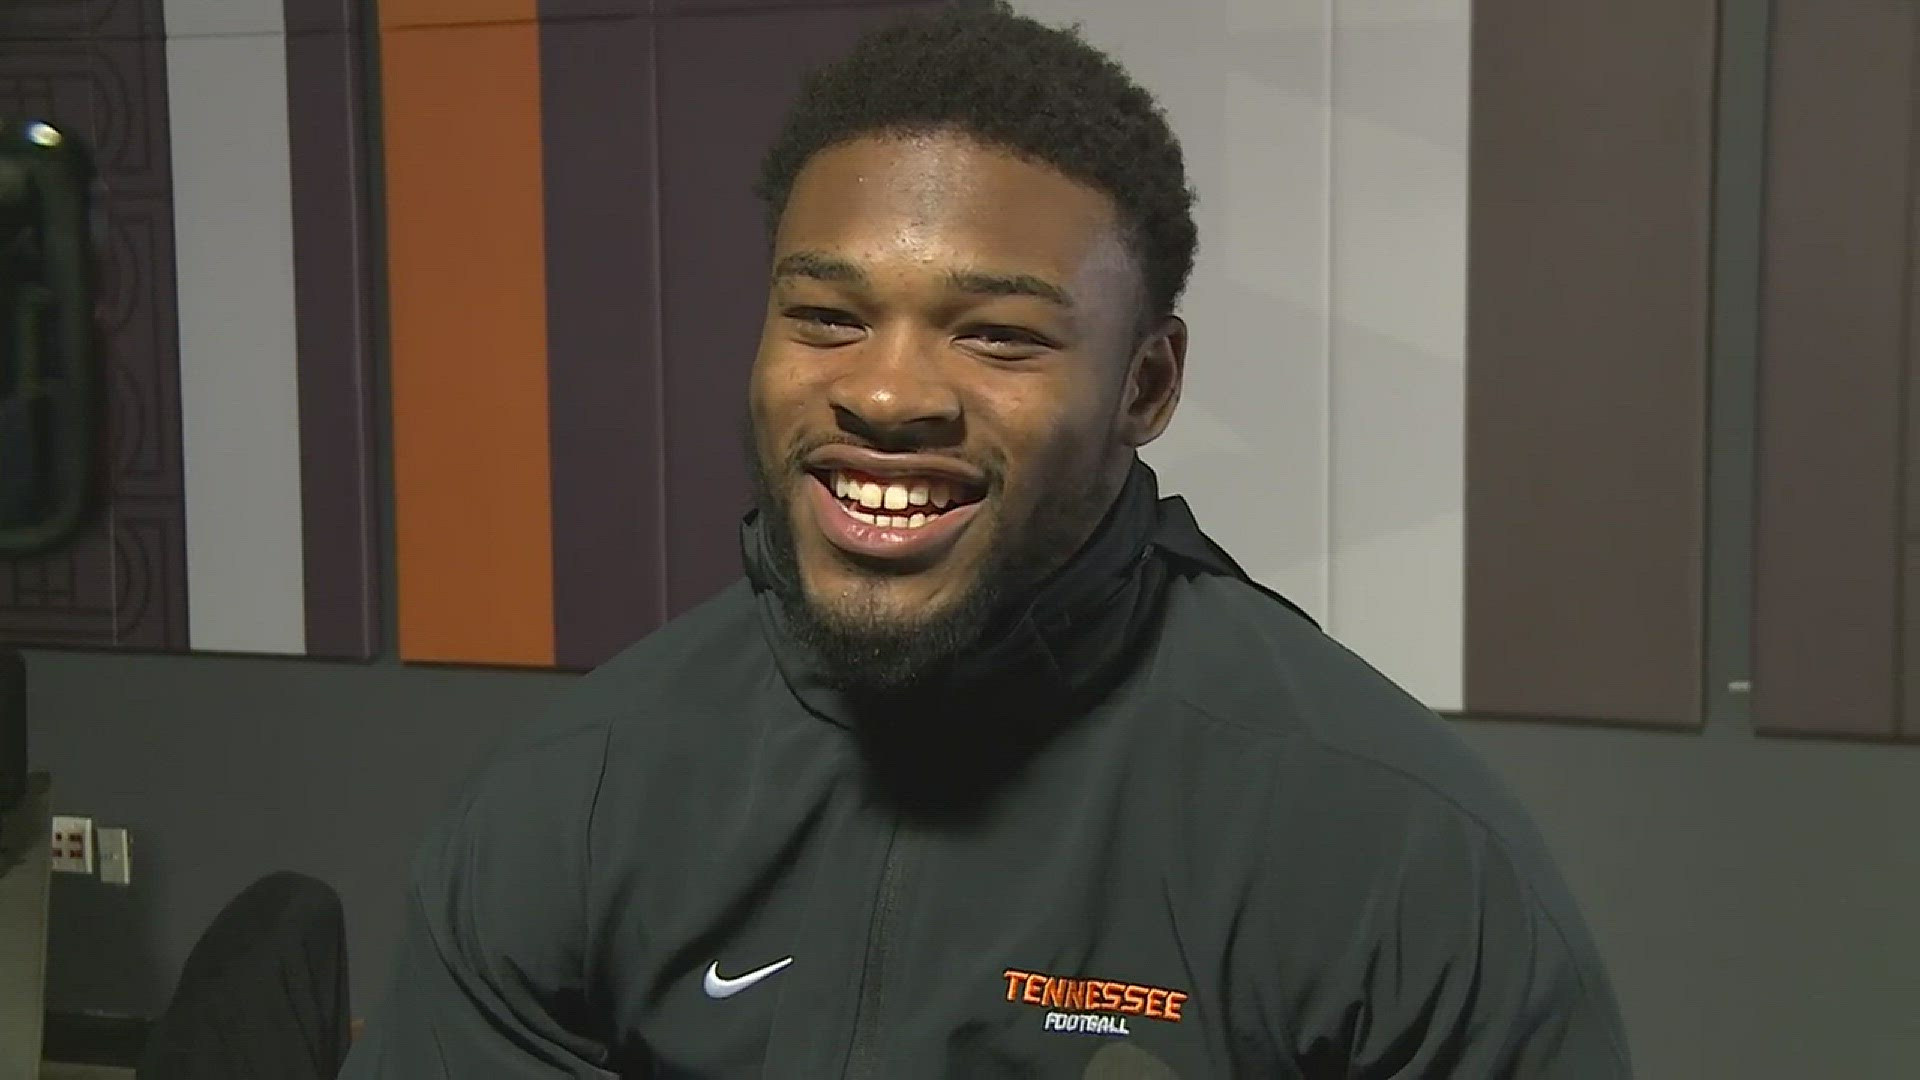 Tennessee running back John Kelly was flagged for unsportsmanlike conduct during the Vols loss to Missouri. He tells his side of the story.